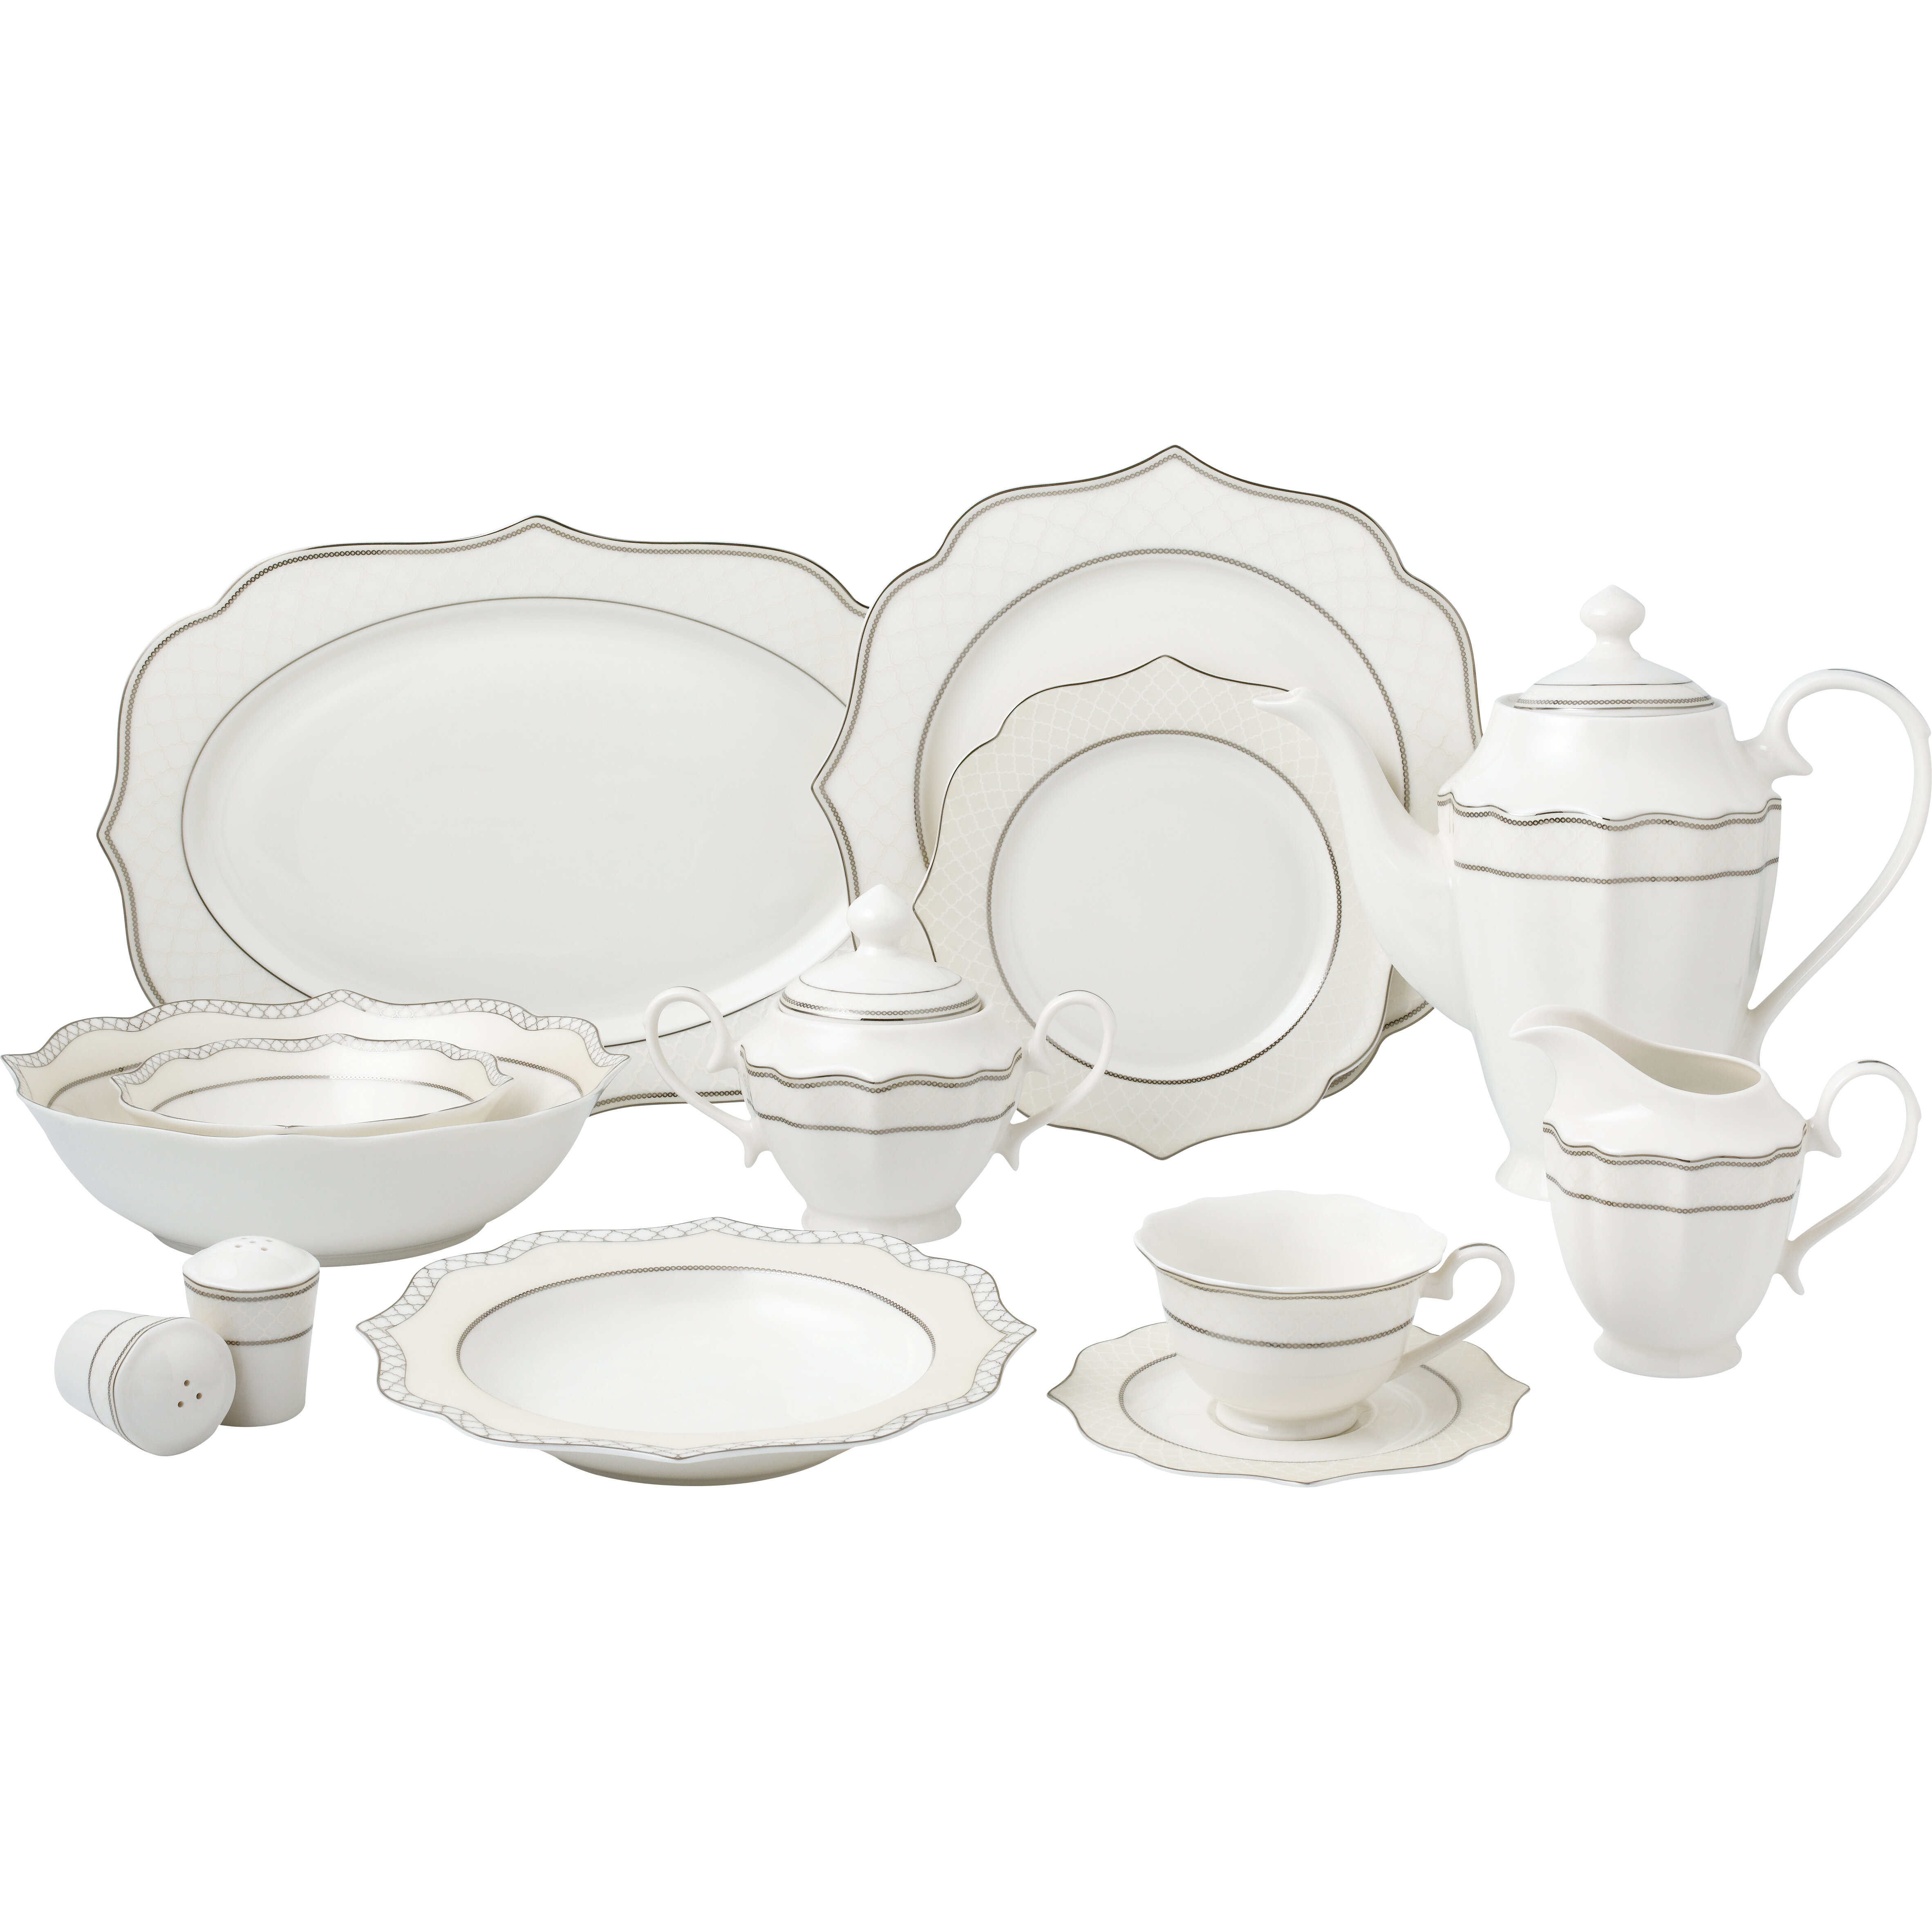 Lorren Home Trends Wavy Silver Mix and Match 57 Piece New Bone China  Dinnerware Set, Service for 8